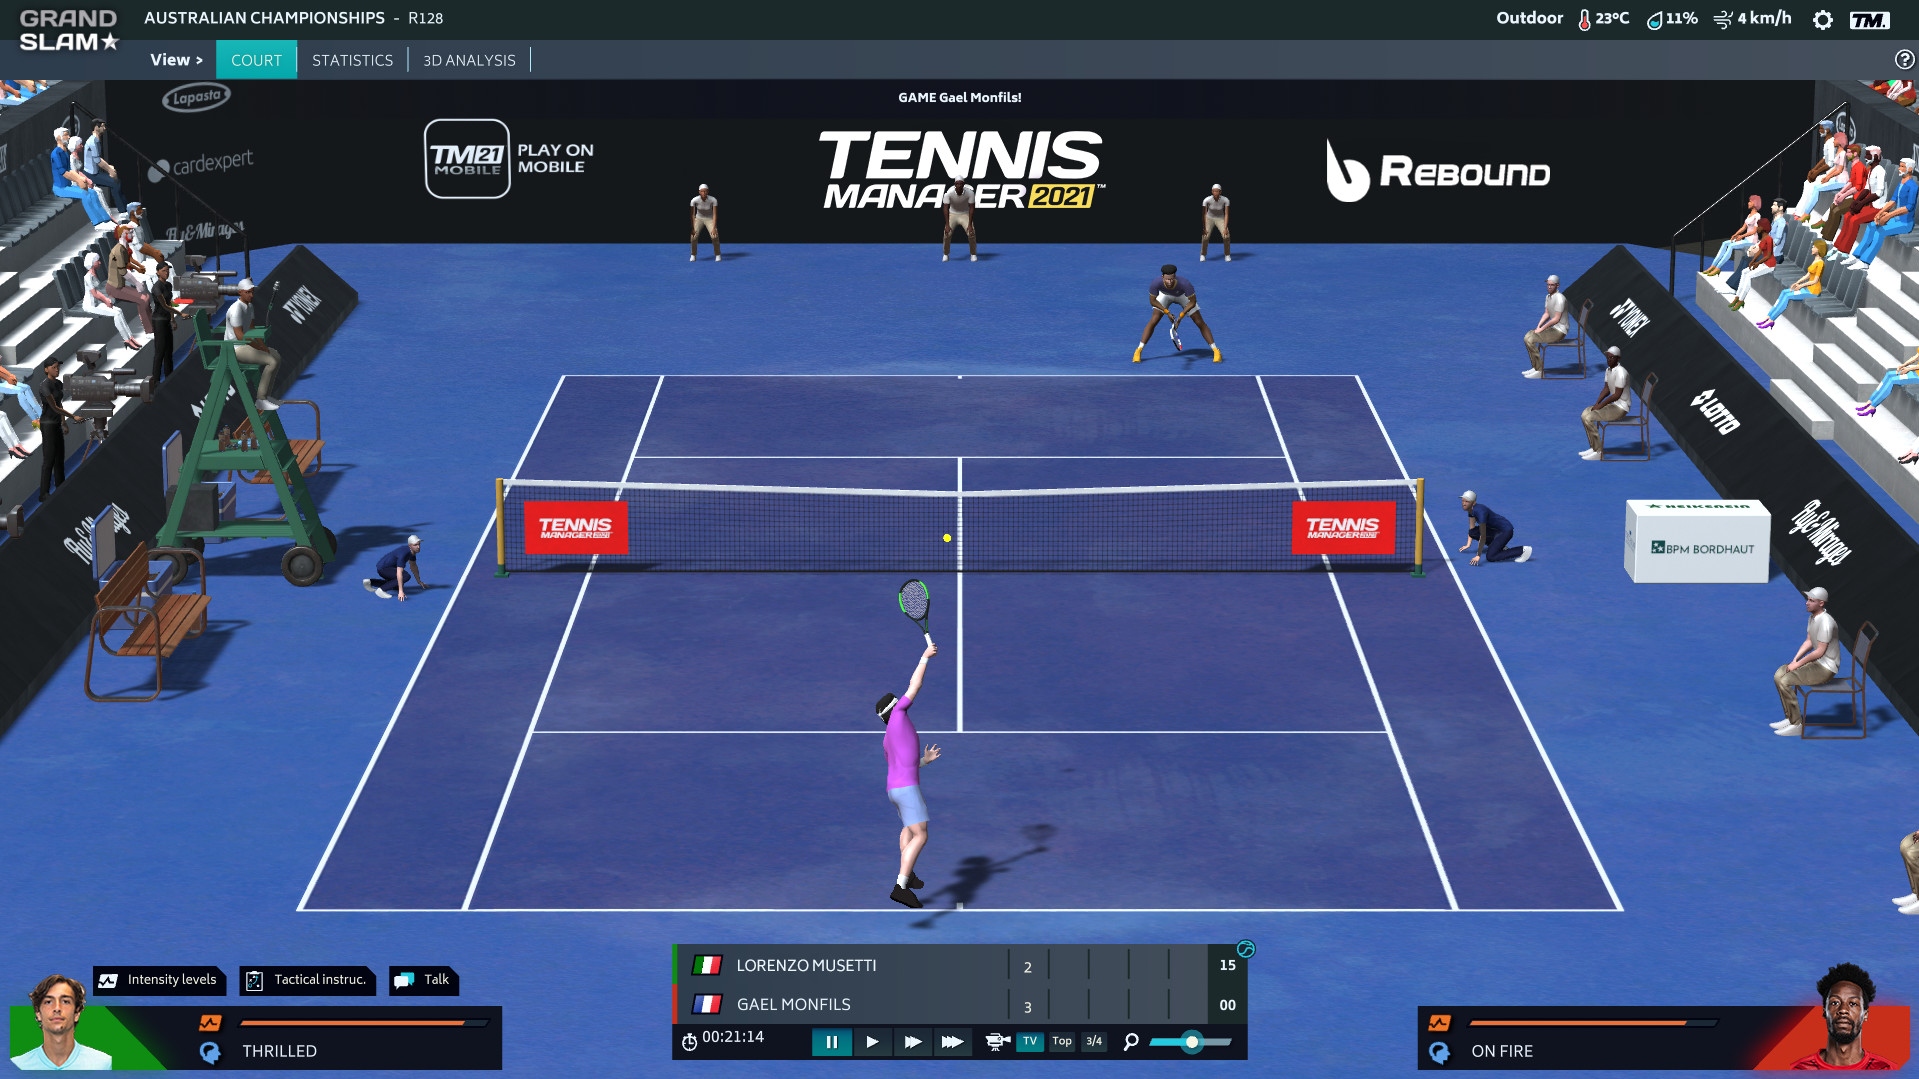 Save 75% on Tennis Manager 2021 on Steam